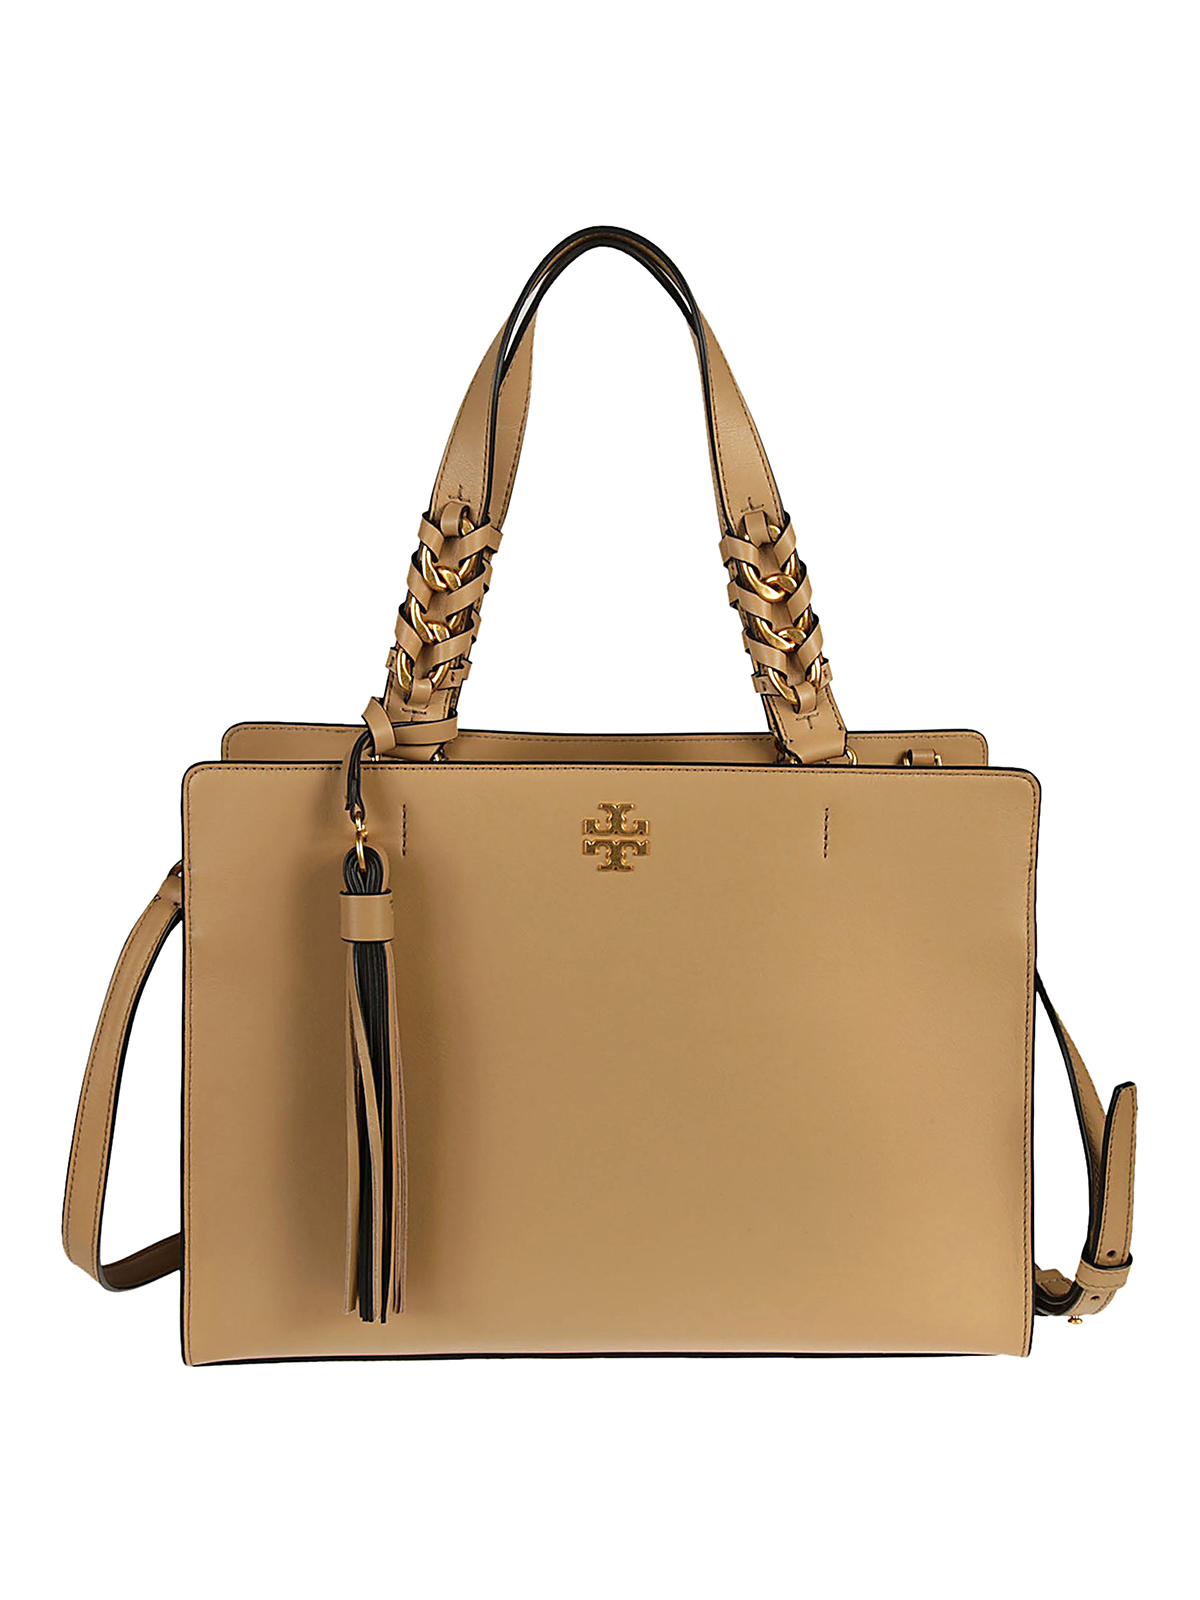 Totes bags Tory Burch - Brooke leather satchel - 43652255 